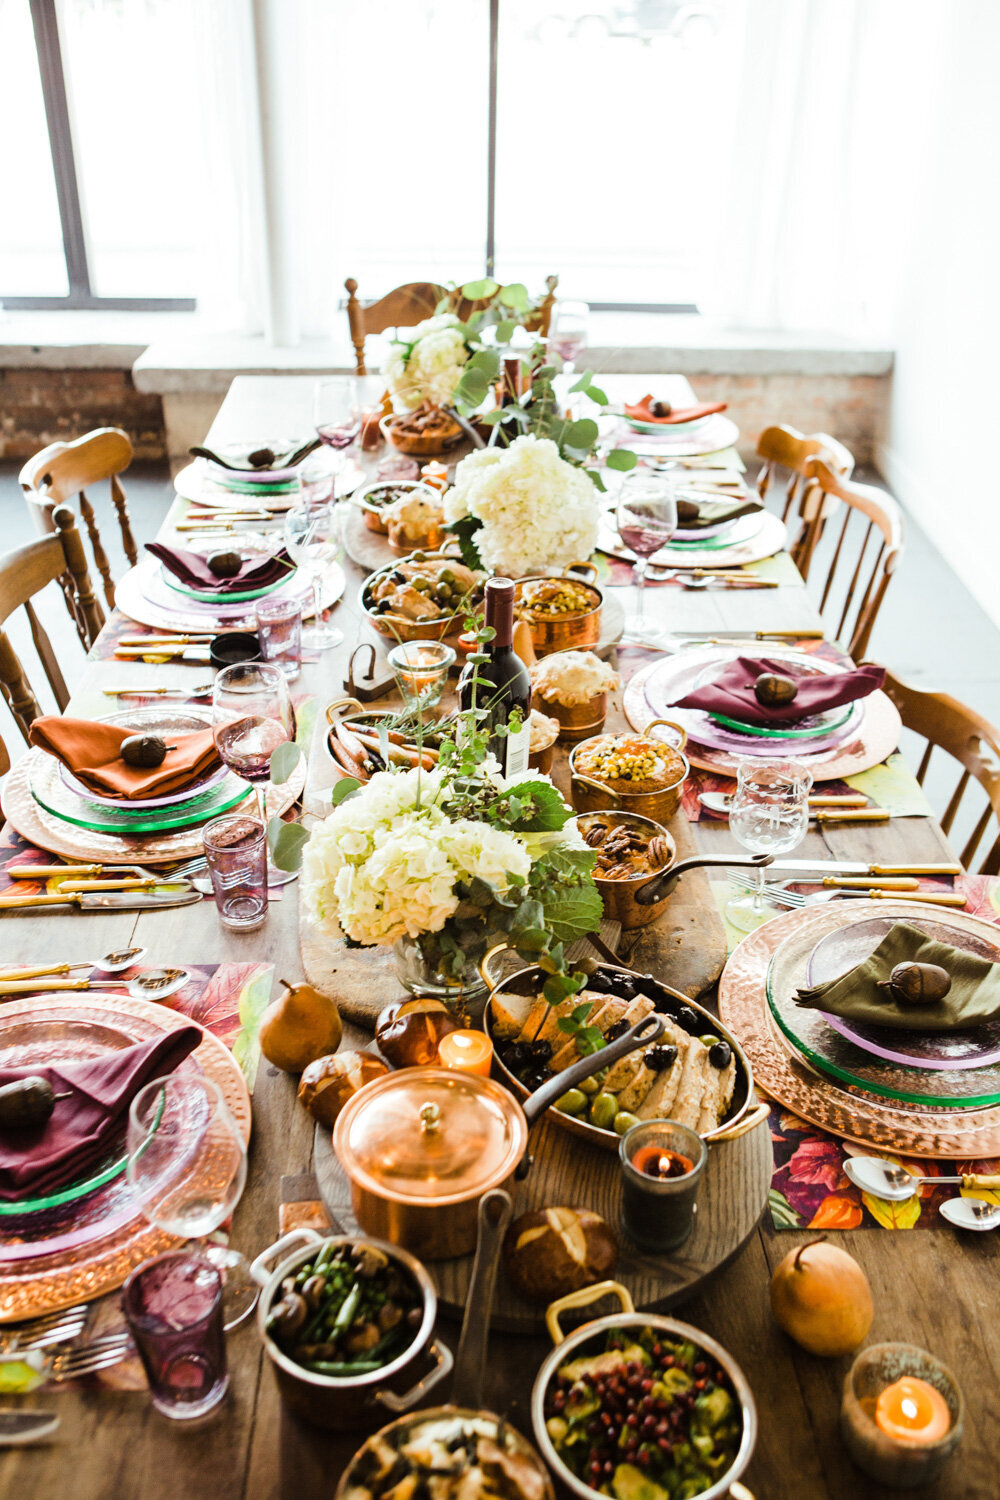 Rectangular dining table with foods, plates, utensils, glasses and centerpiece flowers